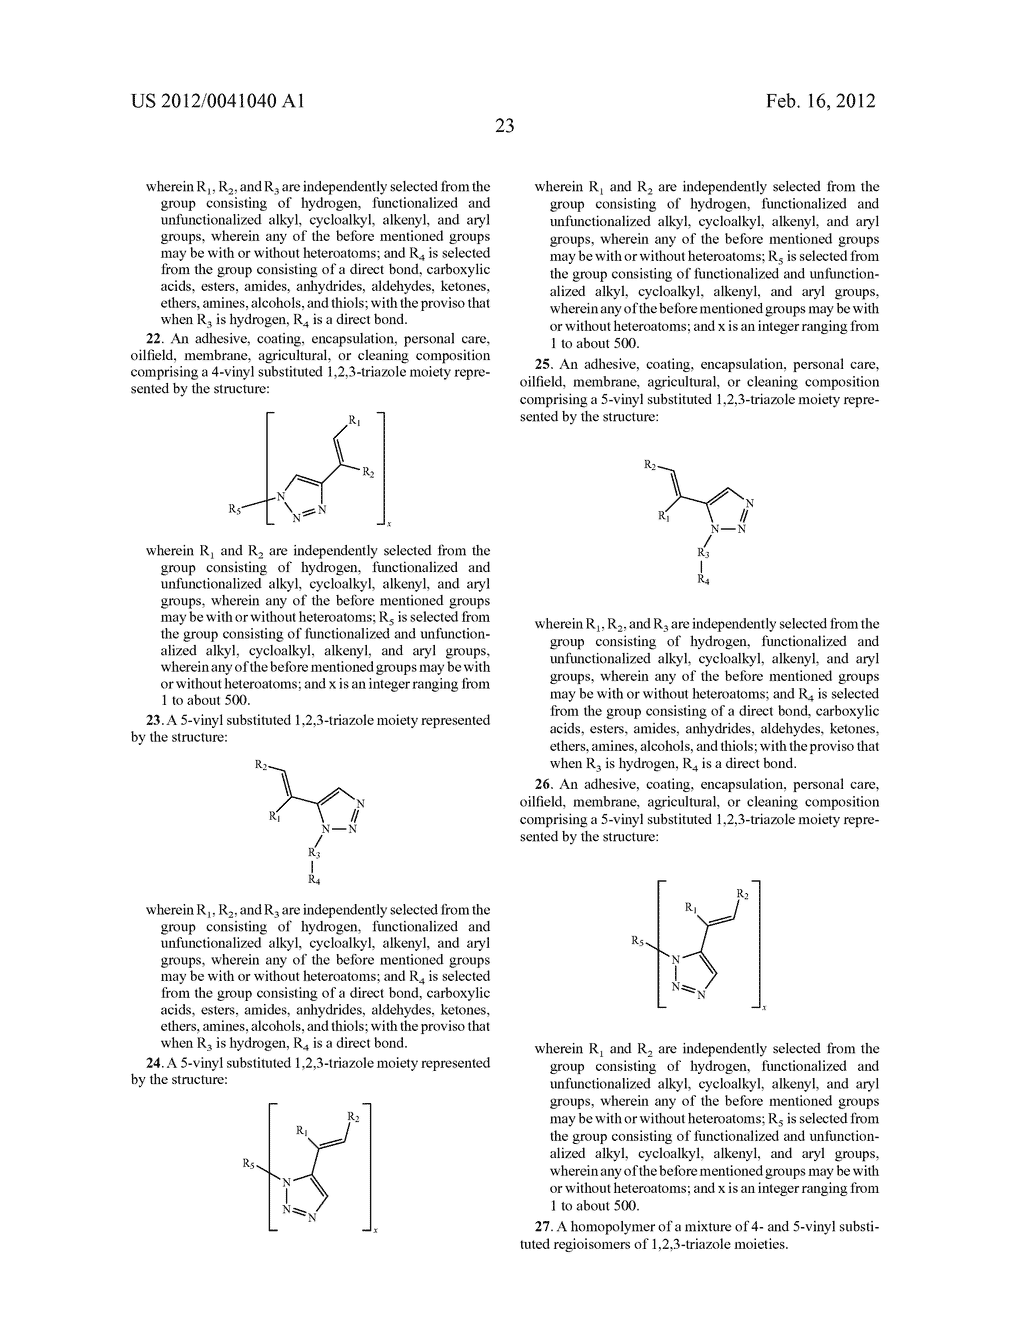 FUNCTIONALIZED 4- AND 5-VINYL SUBSTITUTED REGIOISOMERS OF 1, 2,     3-TRIAZOLES VIA 1, 3-DIPOLAR CYCLOADDITION AND POLYMERS THEREOF - diagram, schematic, and image 24